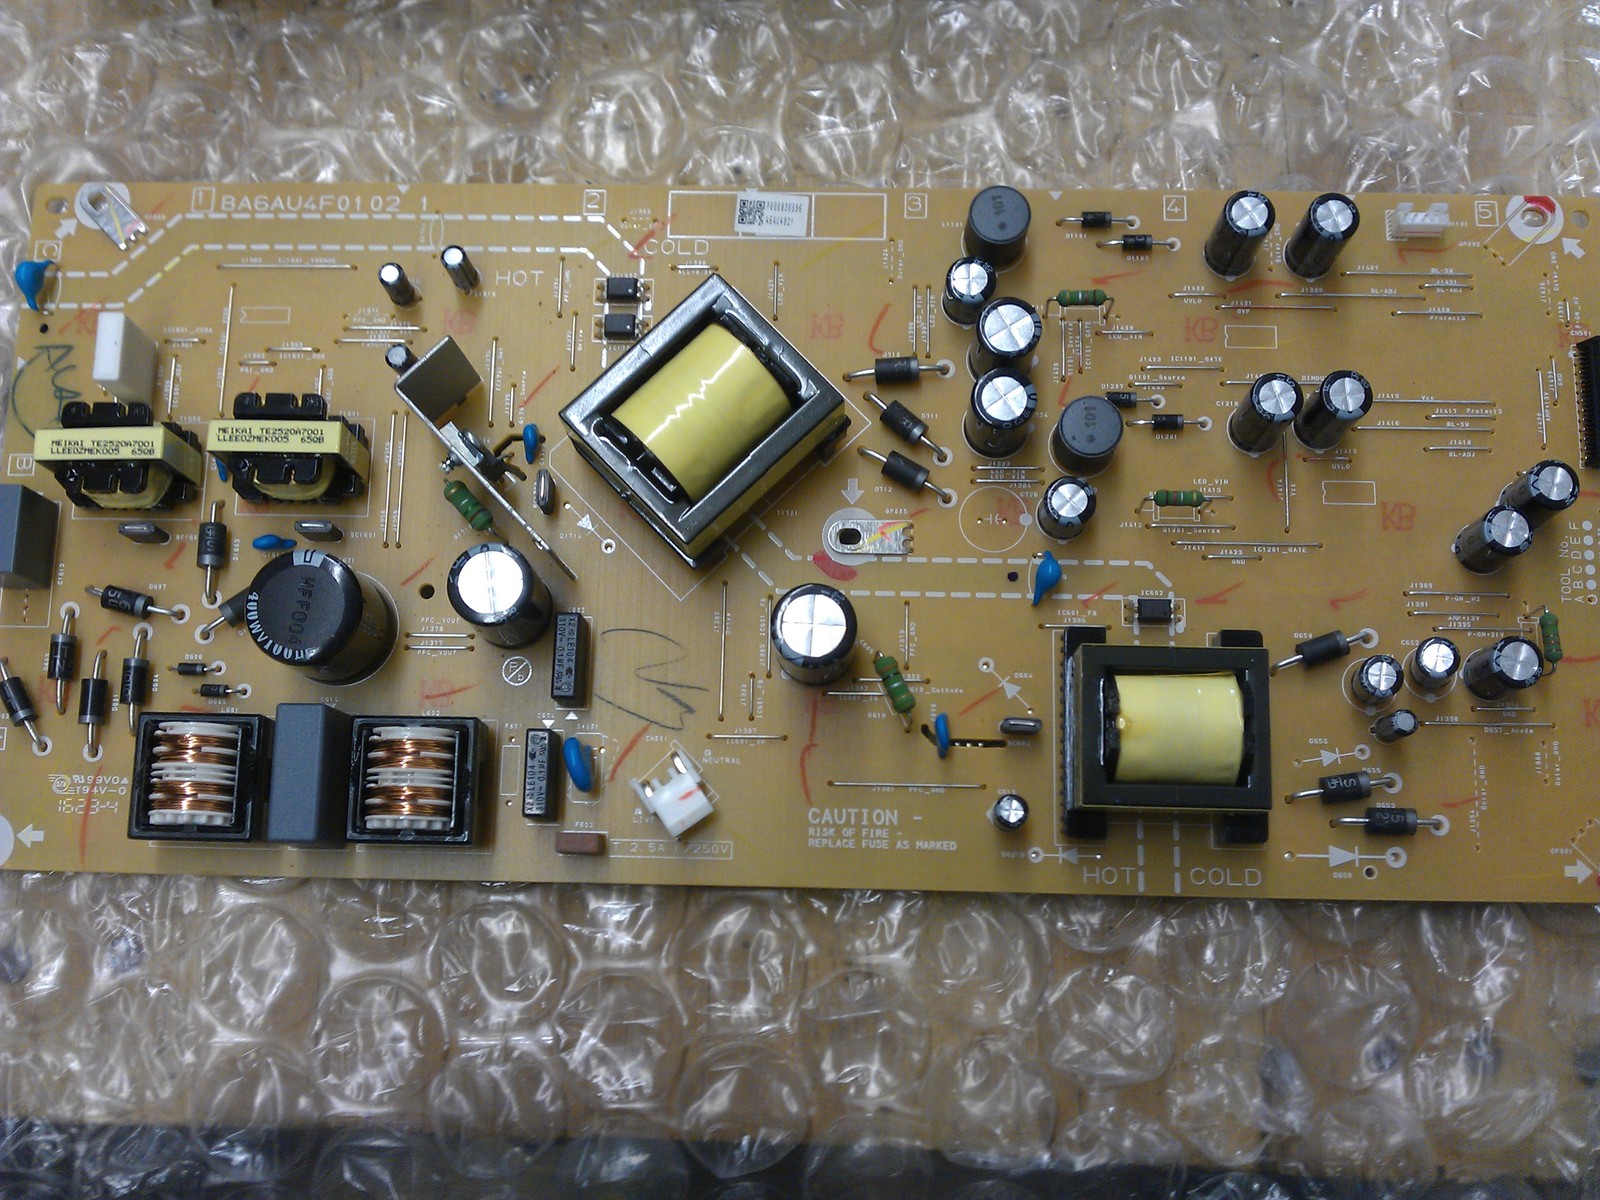 * A6AU4MPW-001 A6AU4021 Power Supply Board From FW50D36F ME1 LCD TV - $40.00